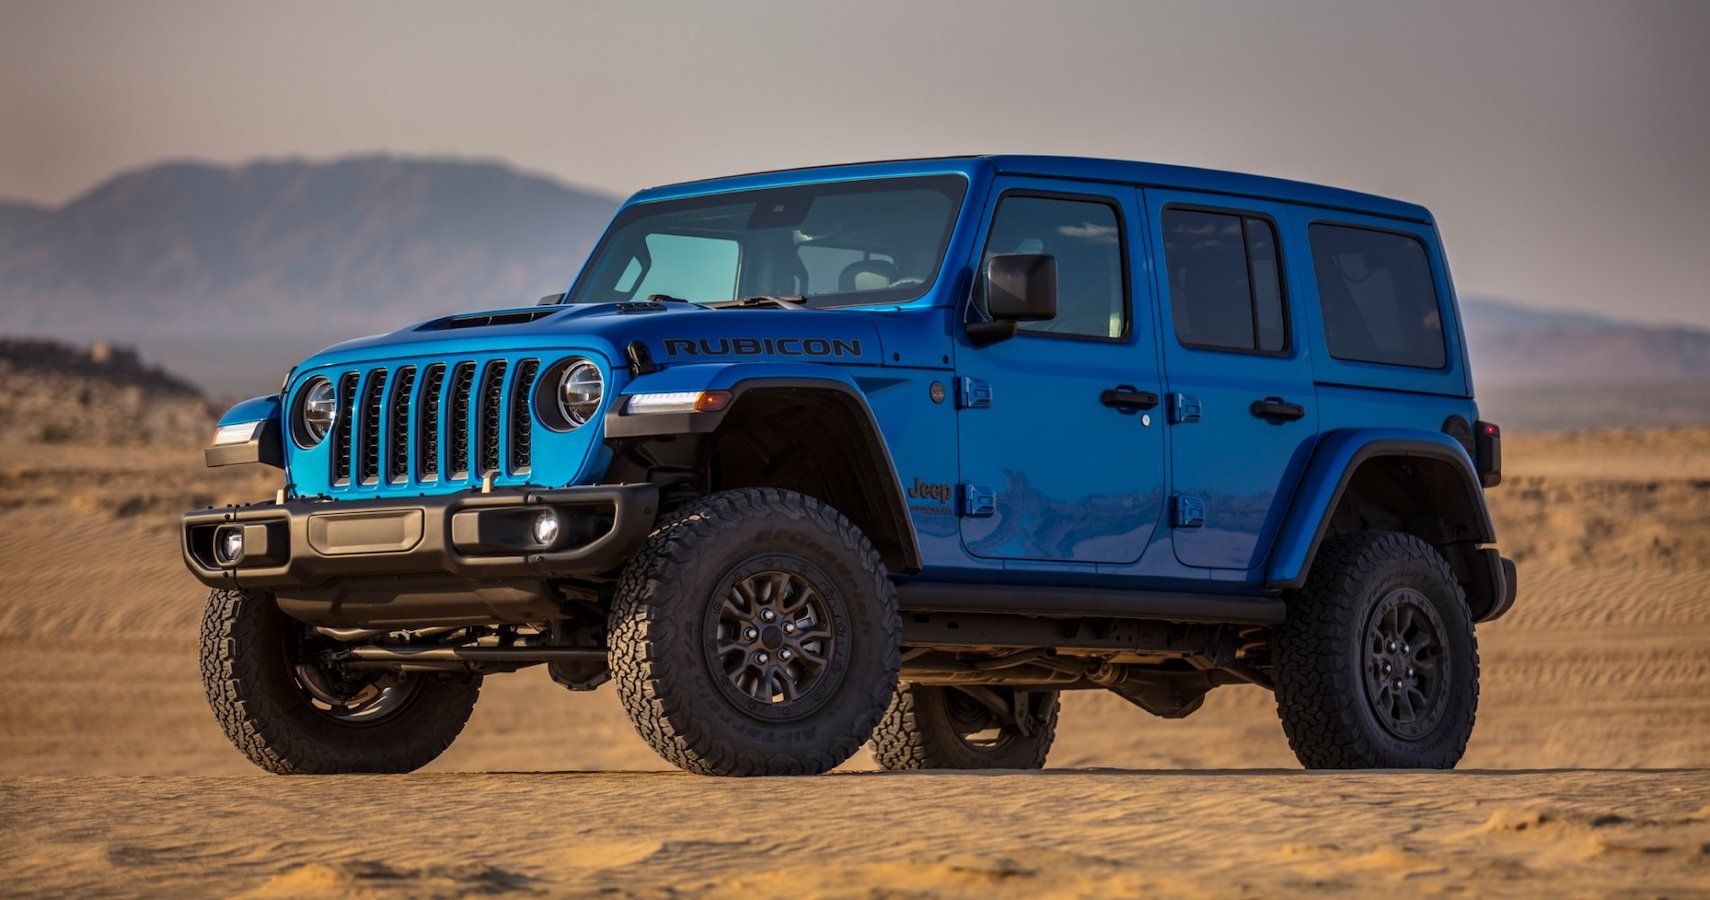 2021 Jeep Wrangler Rubicon 392 Debuts With Awesome HydroGuide System